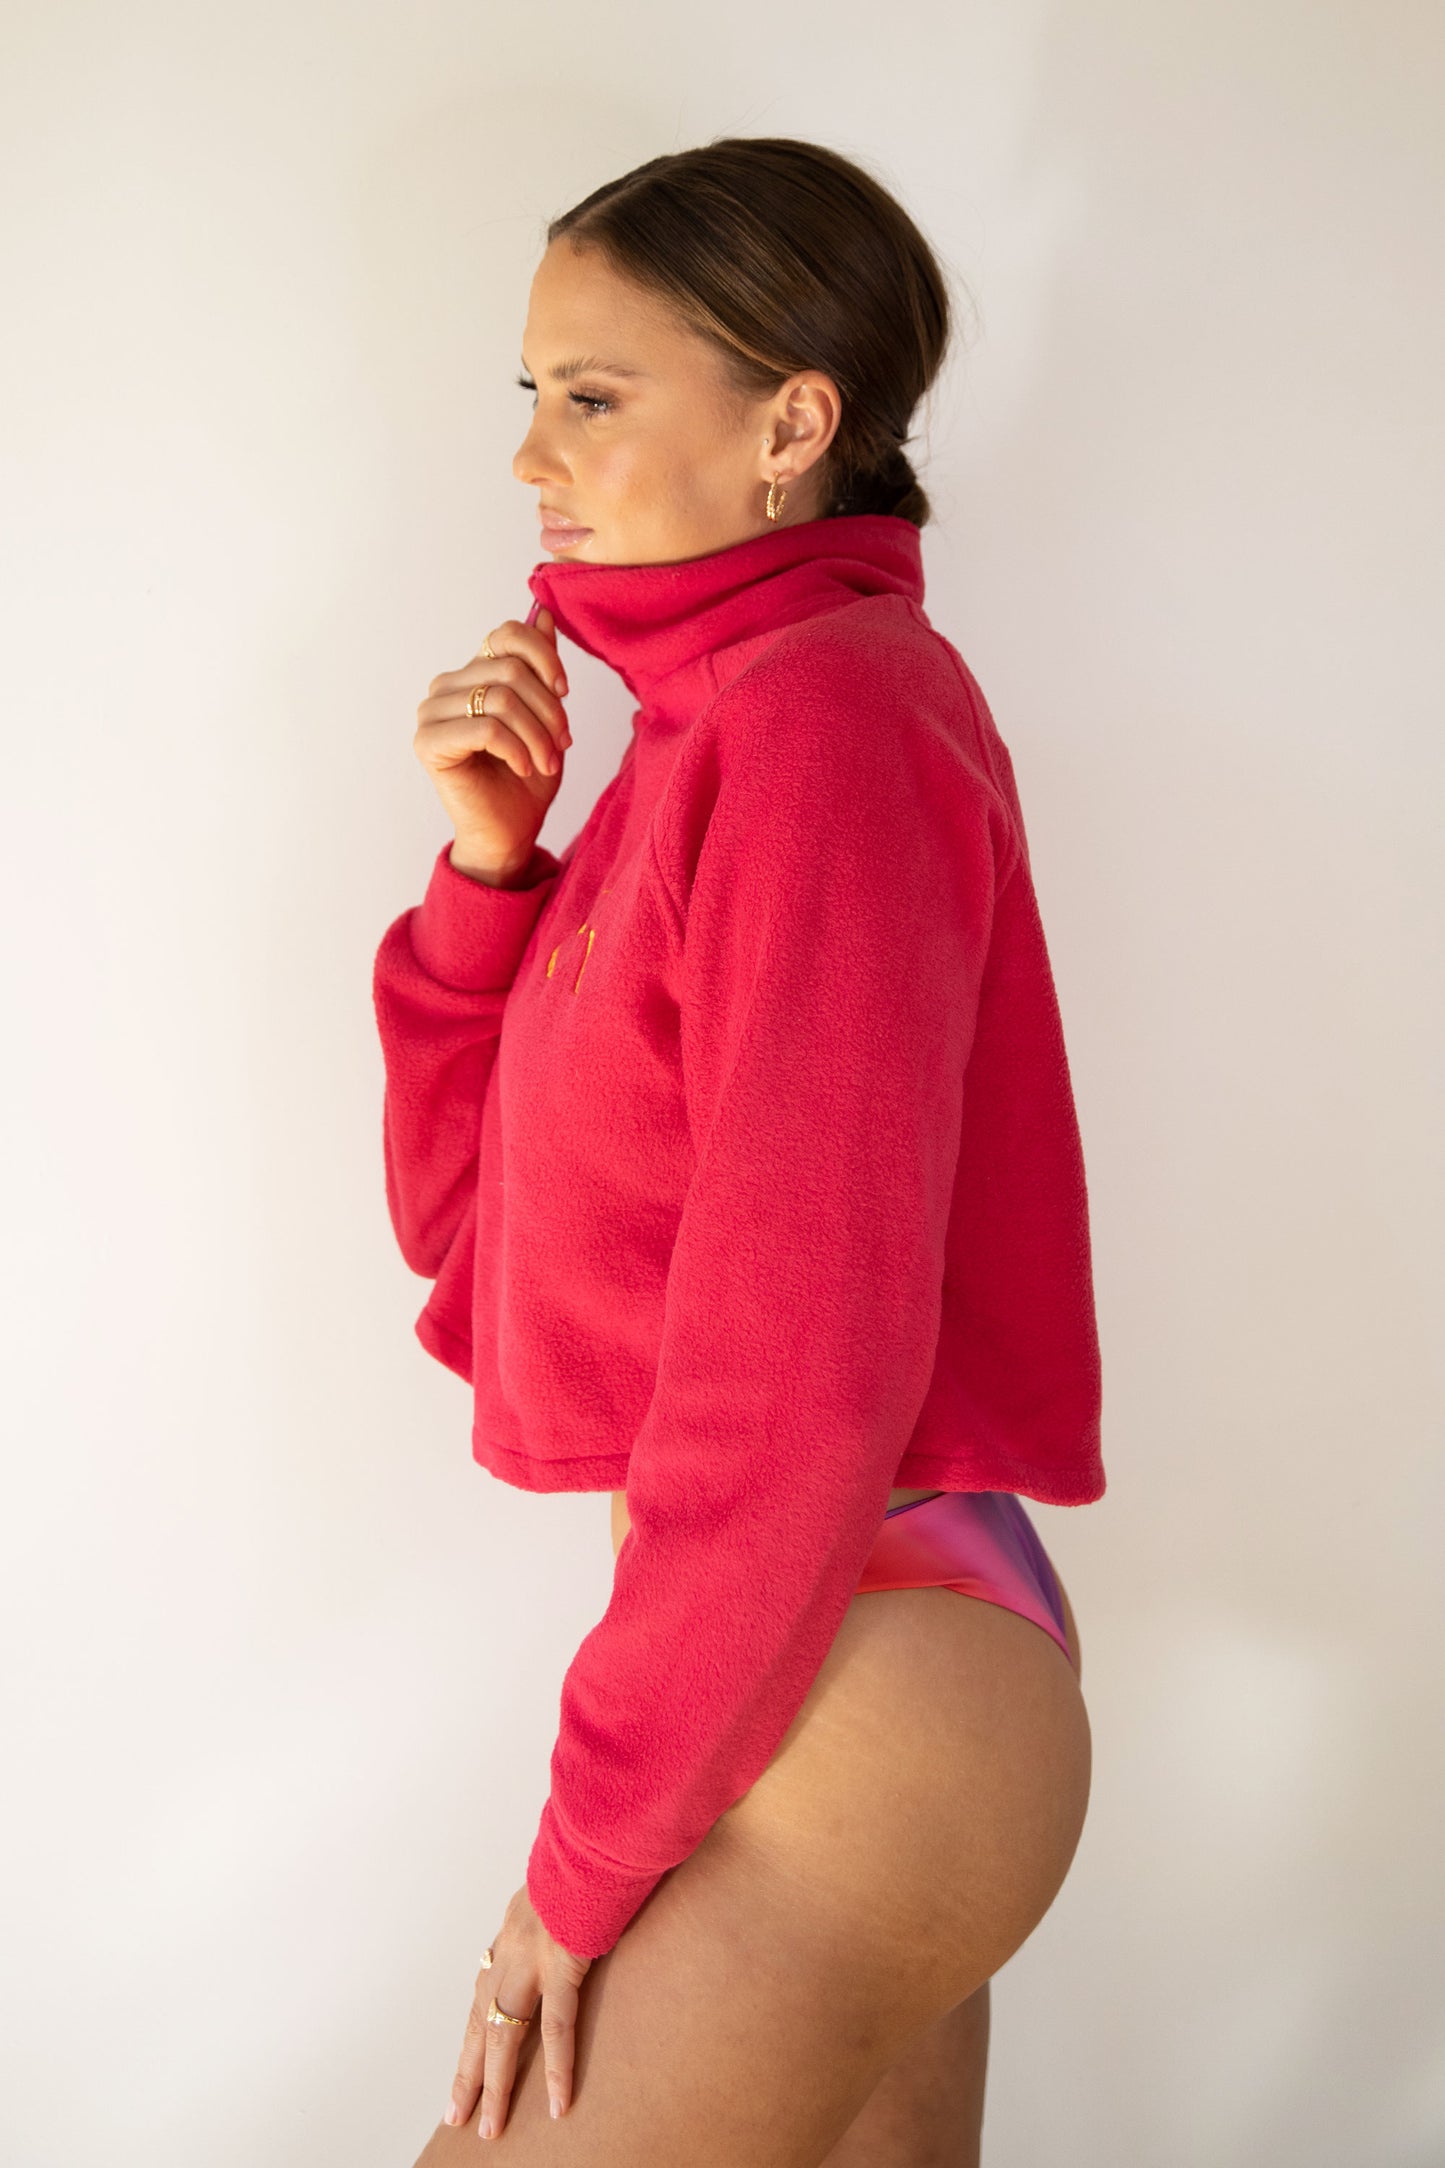 Polar Beverly Hills Cropped - Fucsia